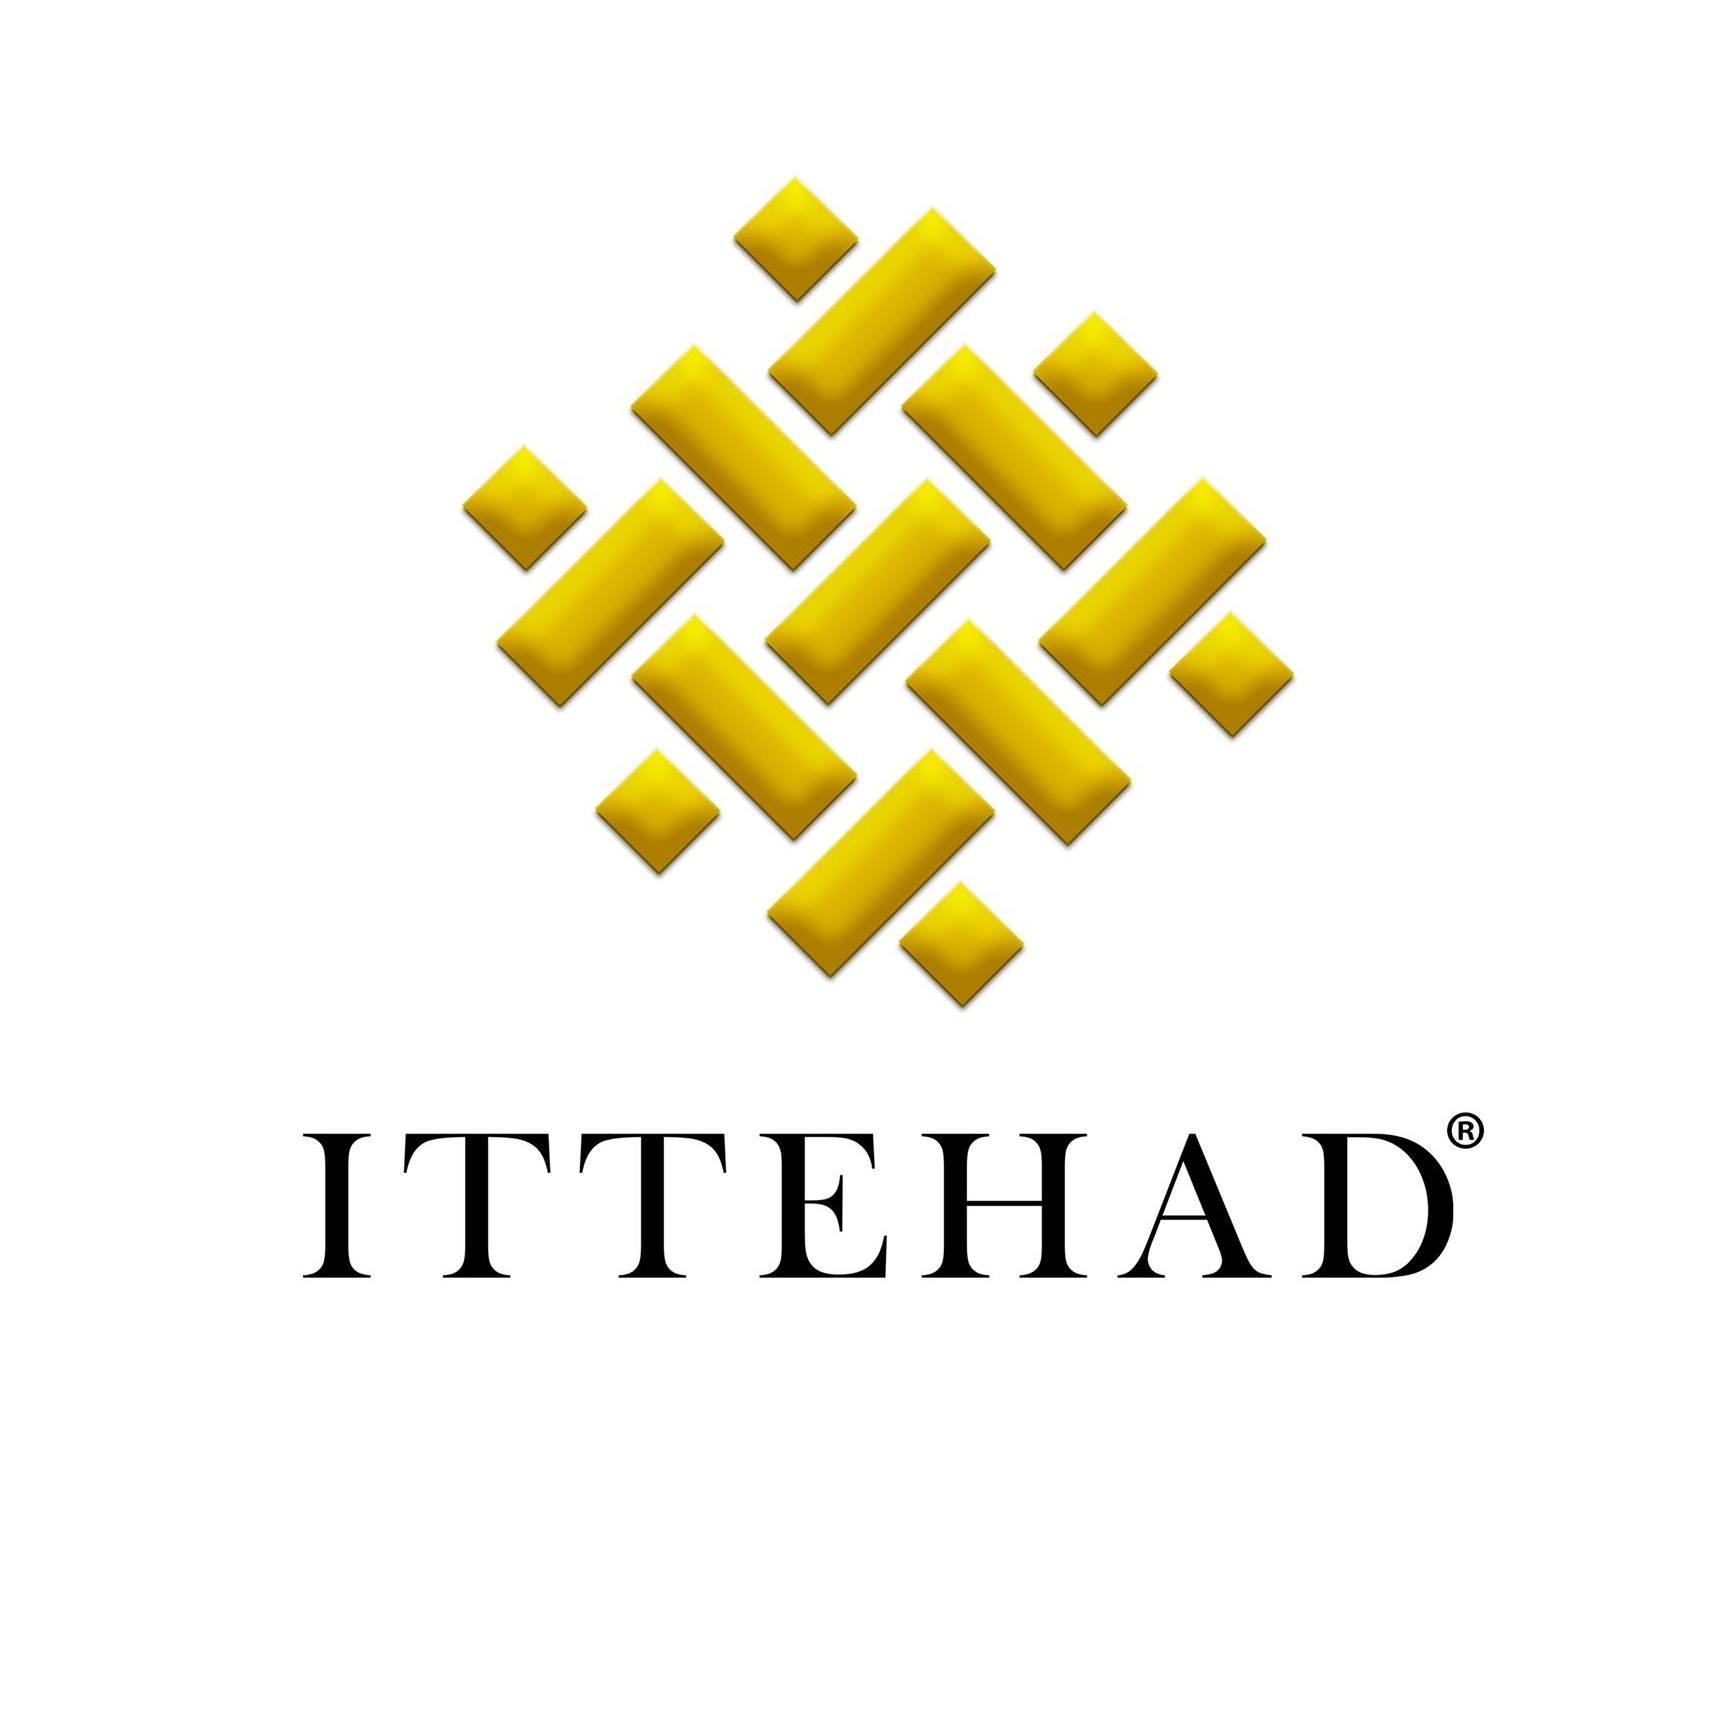 Ittehad - Blessed Friday Sale